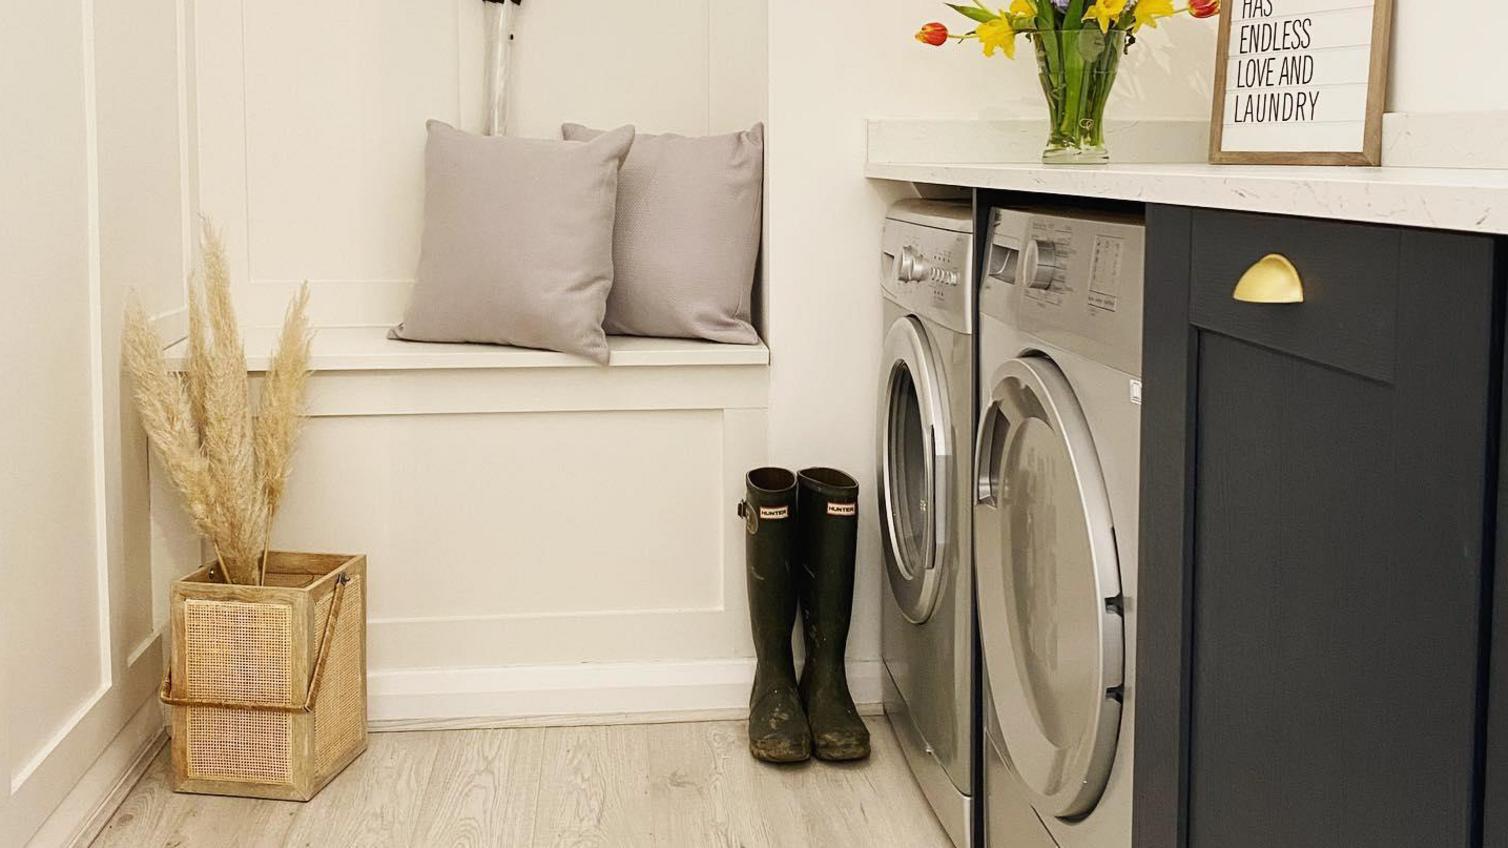 Utility room storage idea showing appliances and navy cupboards, with a storage seat and wall pannelling in ivory.